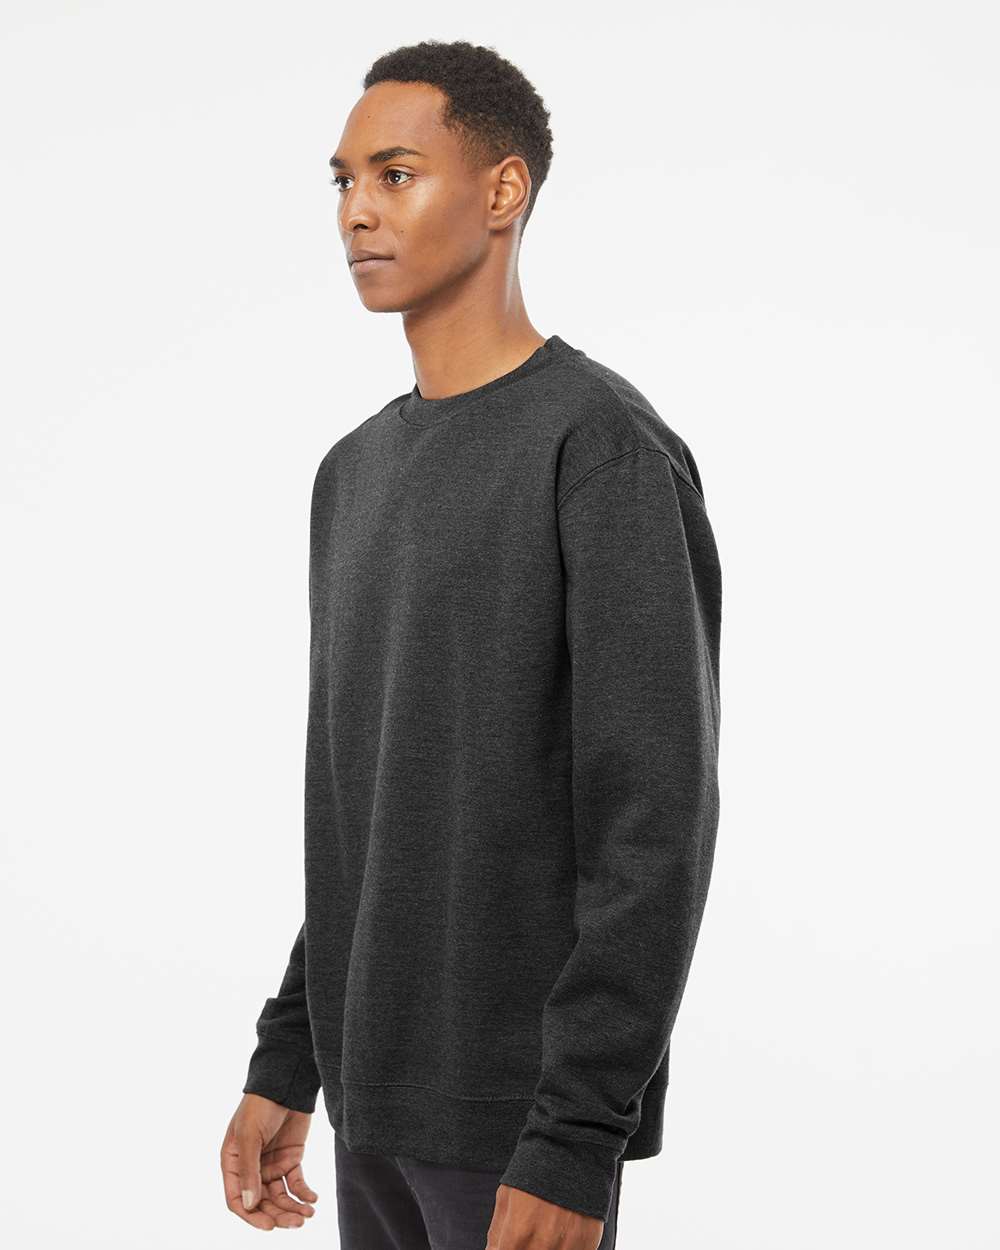 Independent Trading Co. Midweight Sweatshirt SS3000 #colormdl_Charcoal Heather